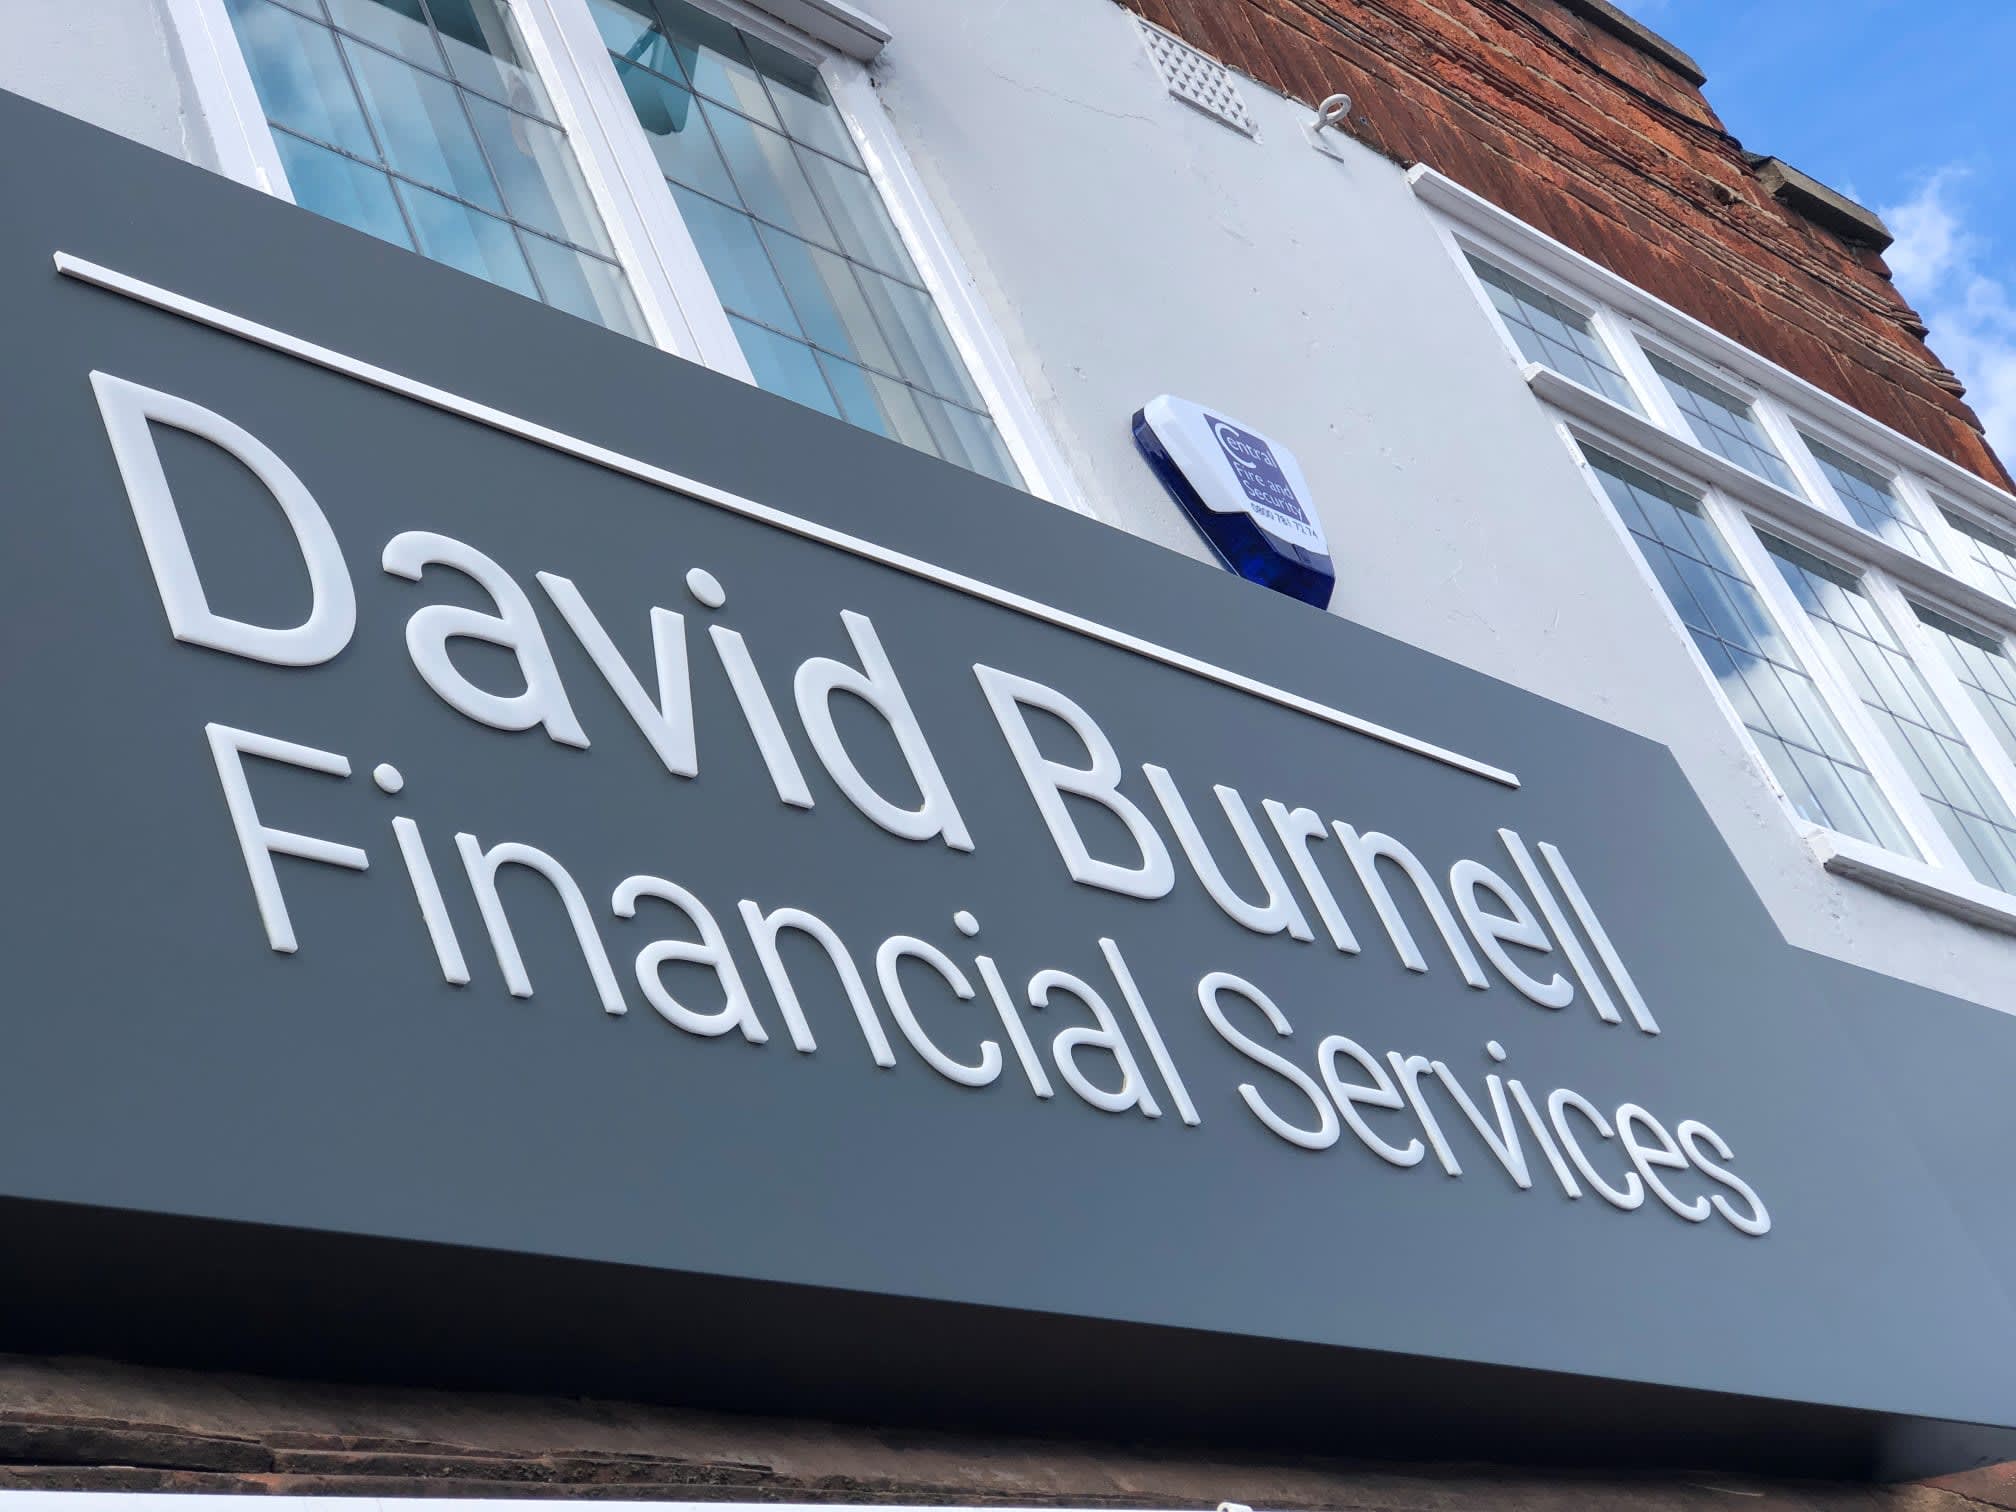 Images David Burnell Financial Services